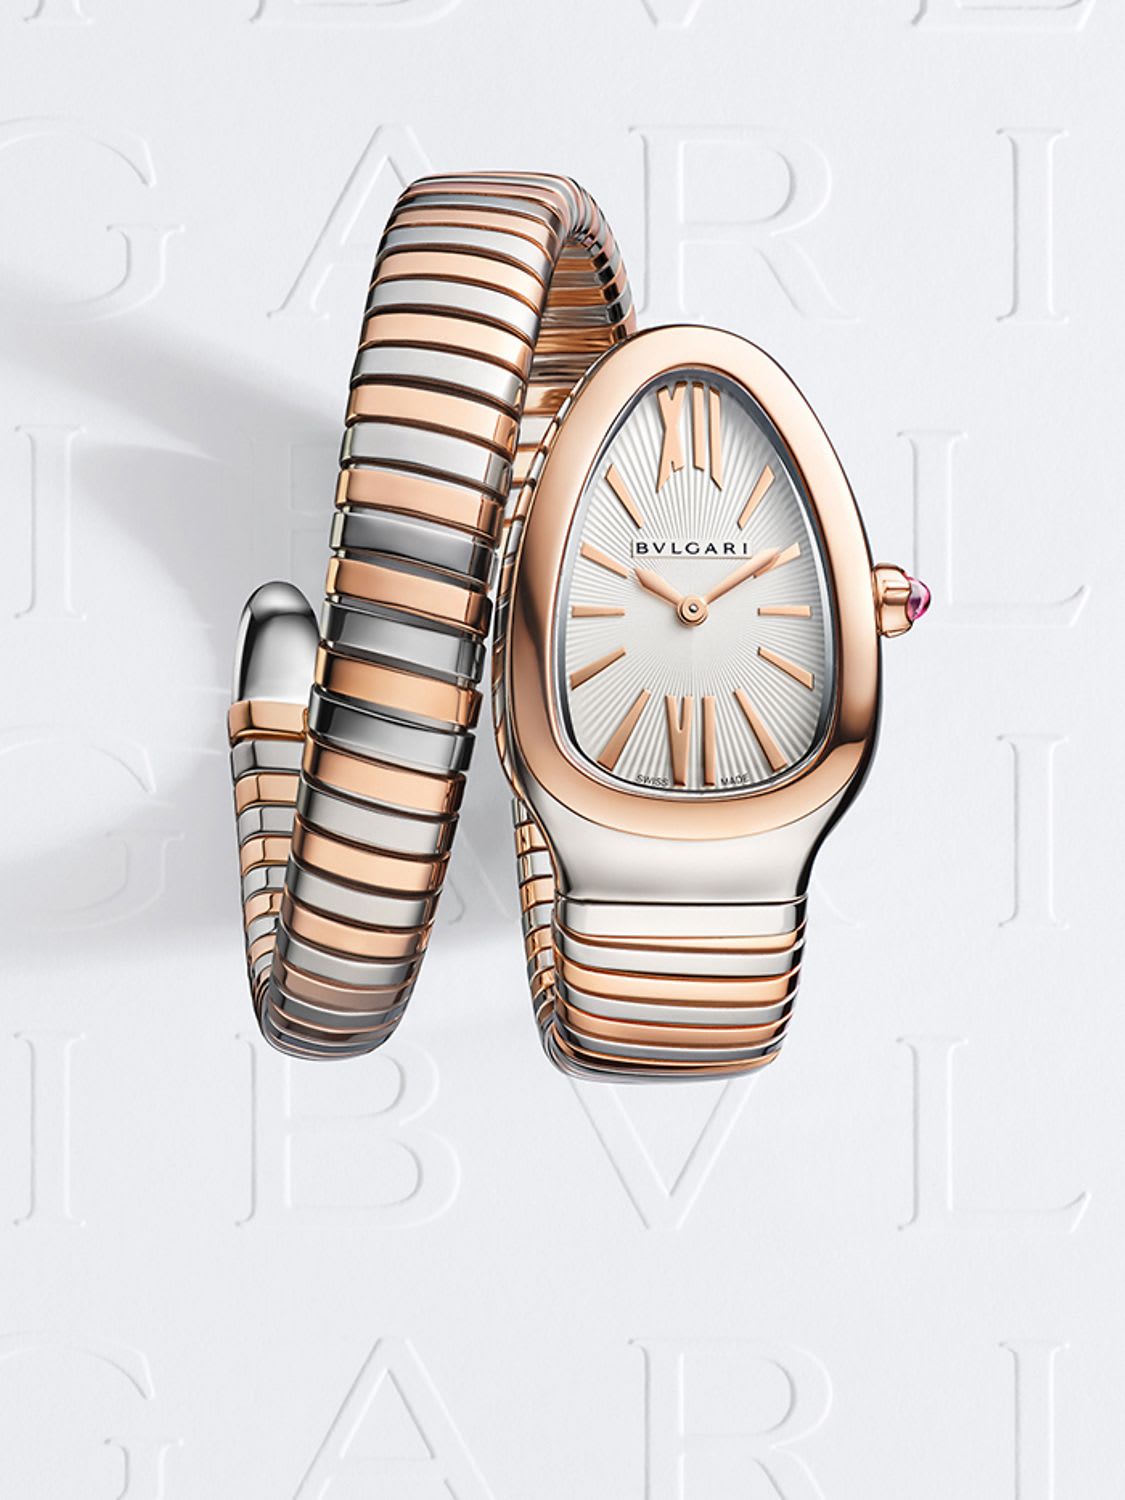 Luxury Watches | Bvlgari Official Store